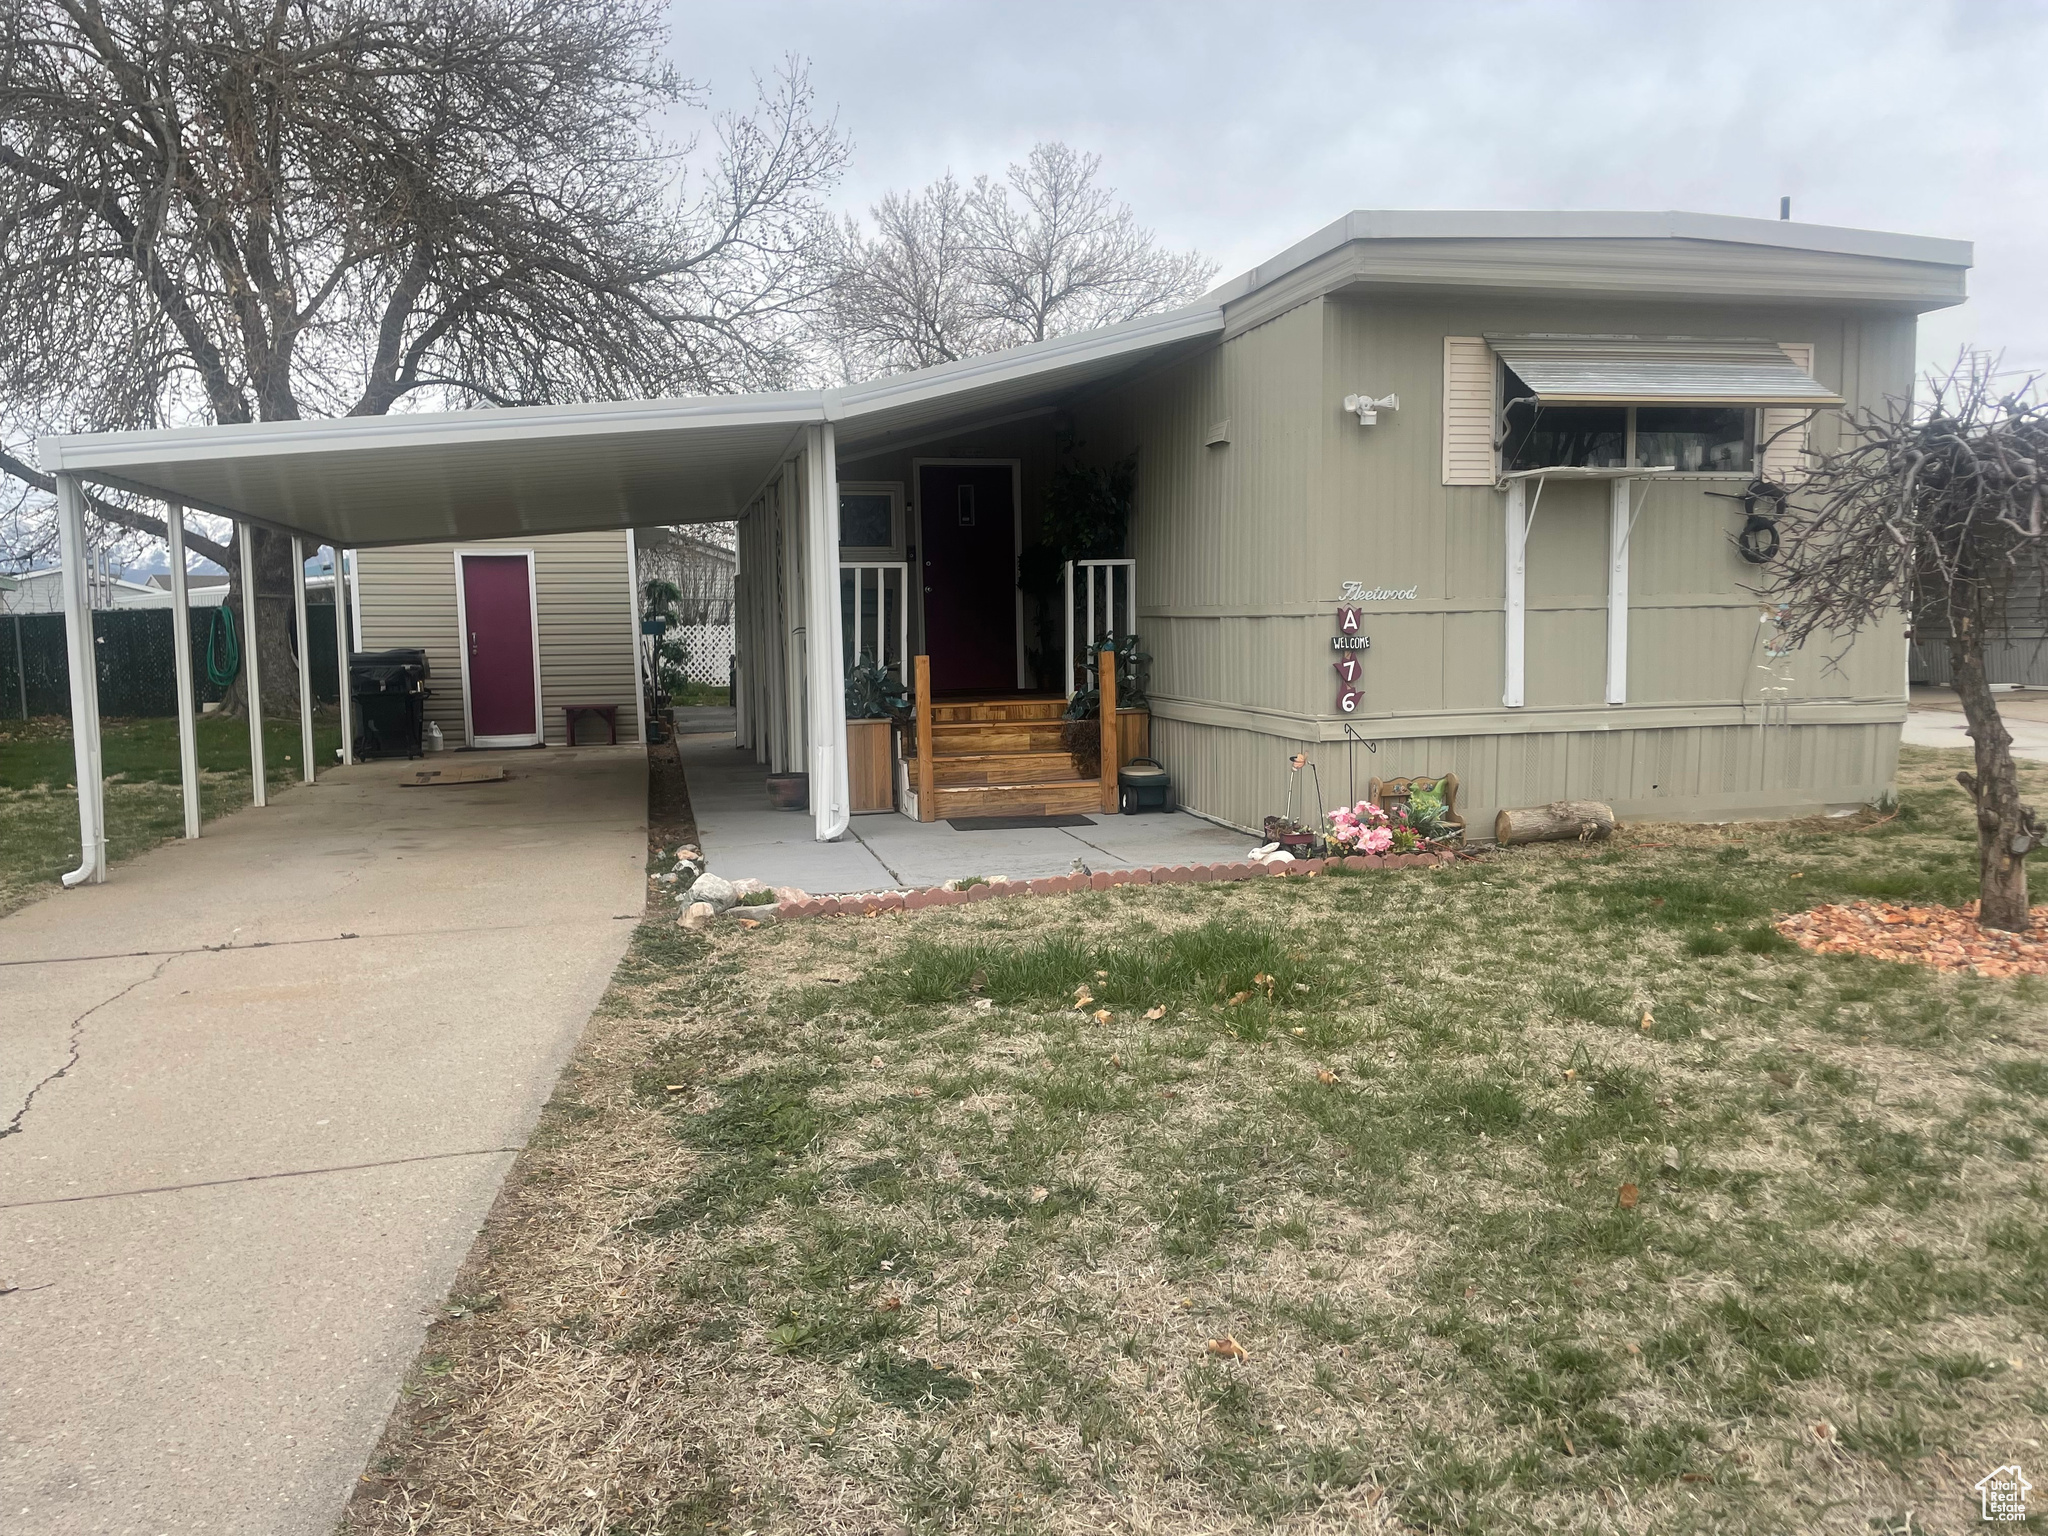 3860 MIDLAND DR. ##A76, Roy, Utah 84067, 2 Bedrooms Bedrooms, 6 Rooms Rooms,1 BathroomBathrooms,Residential,For sale,MIDLAND DR.,1989135